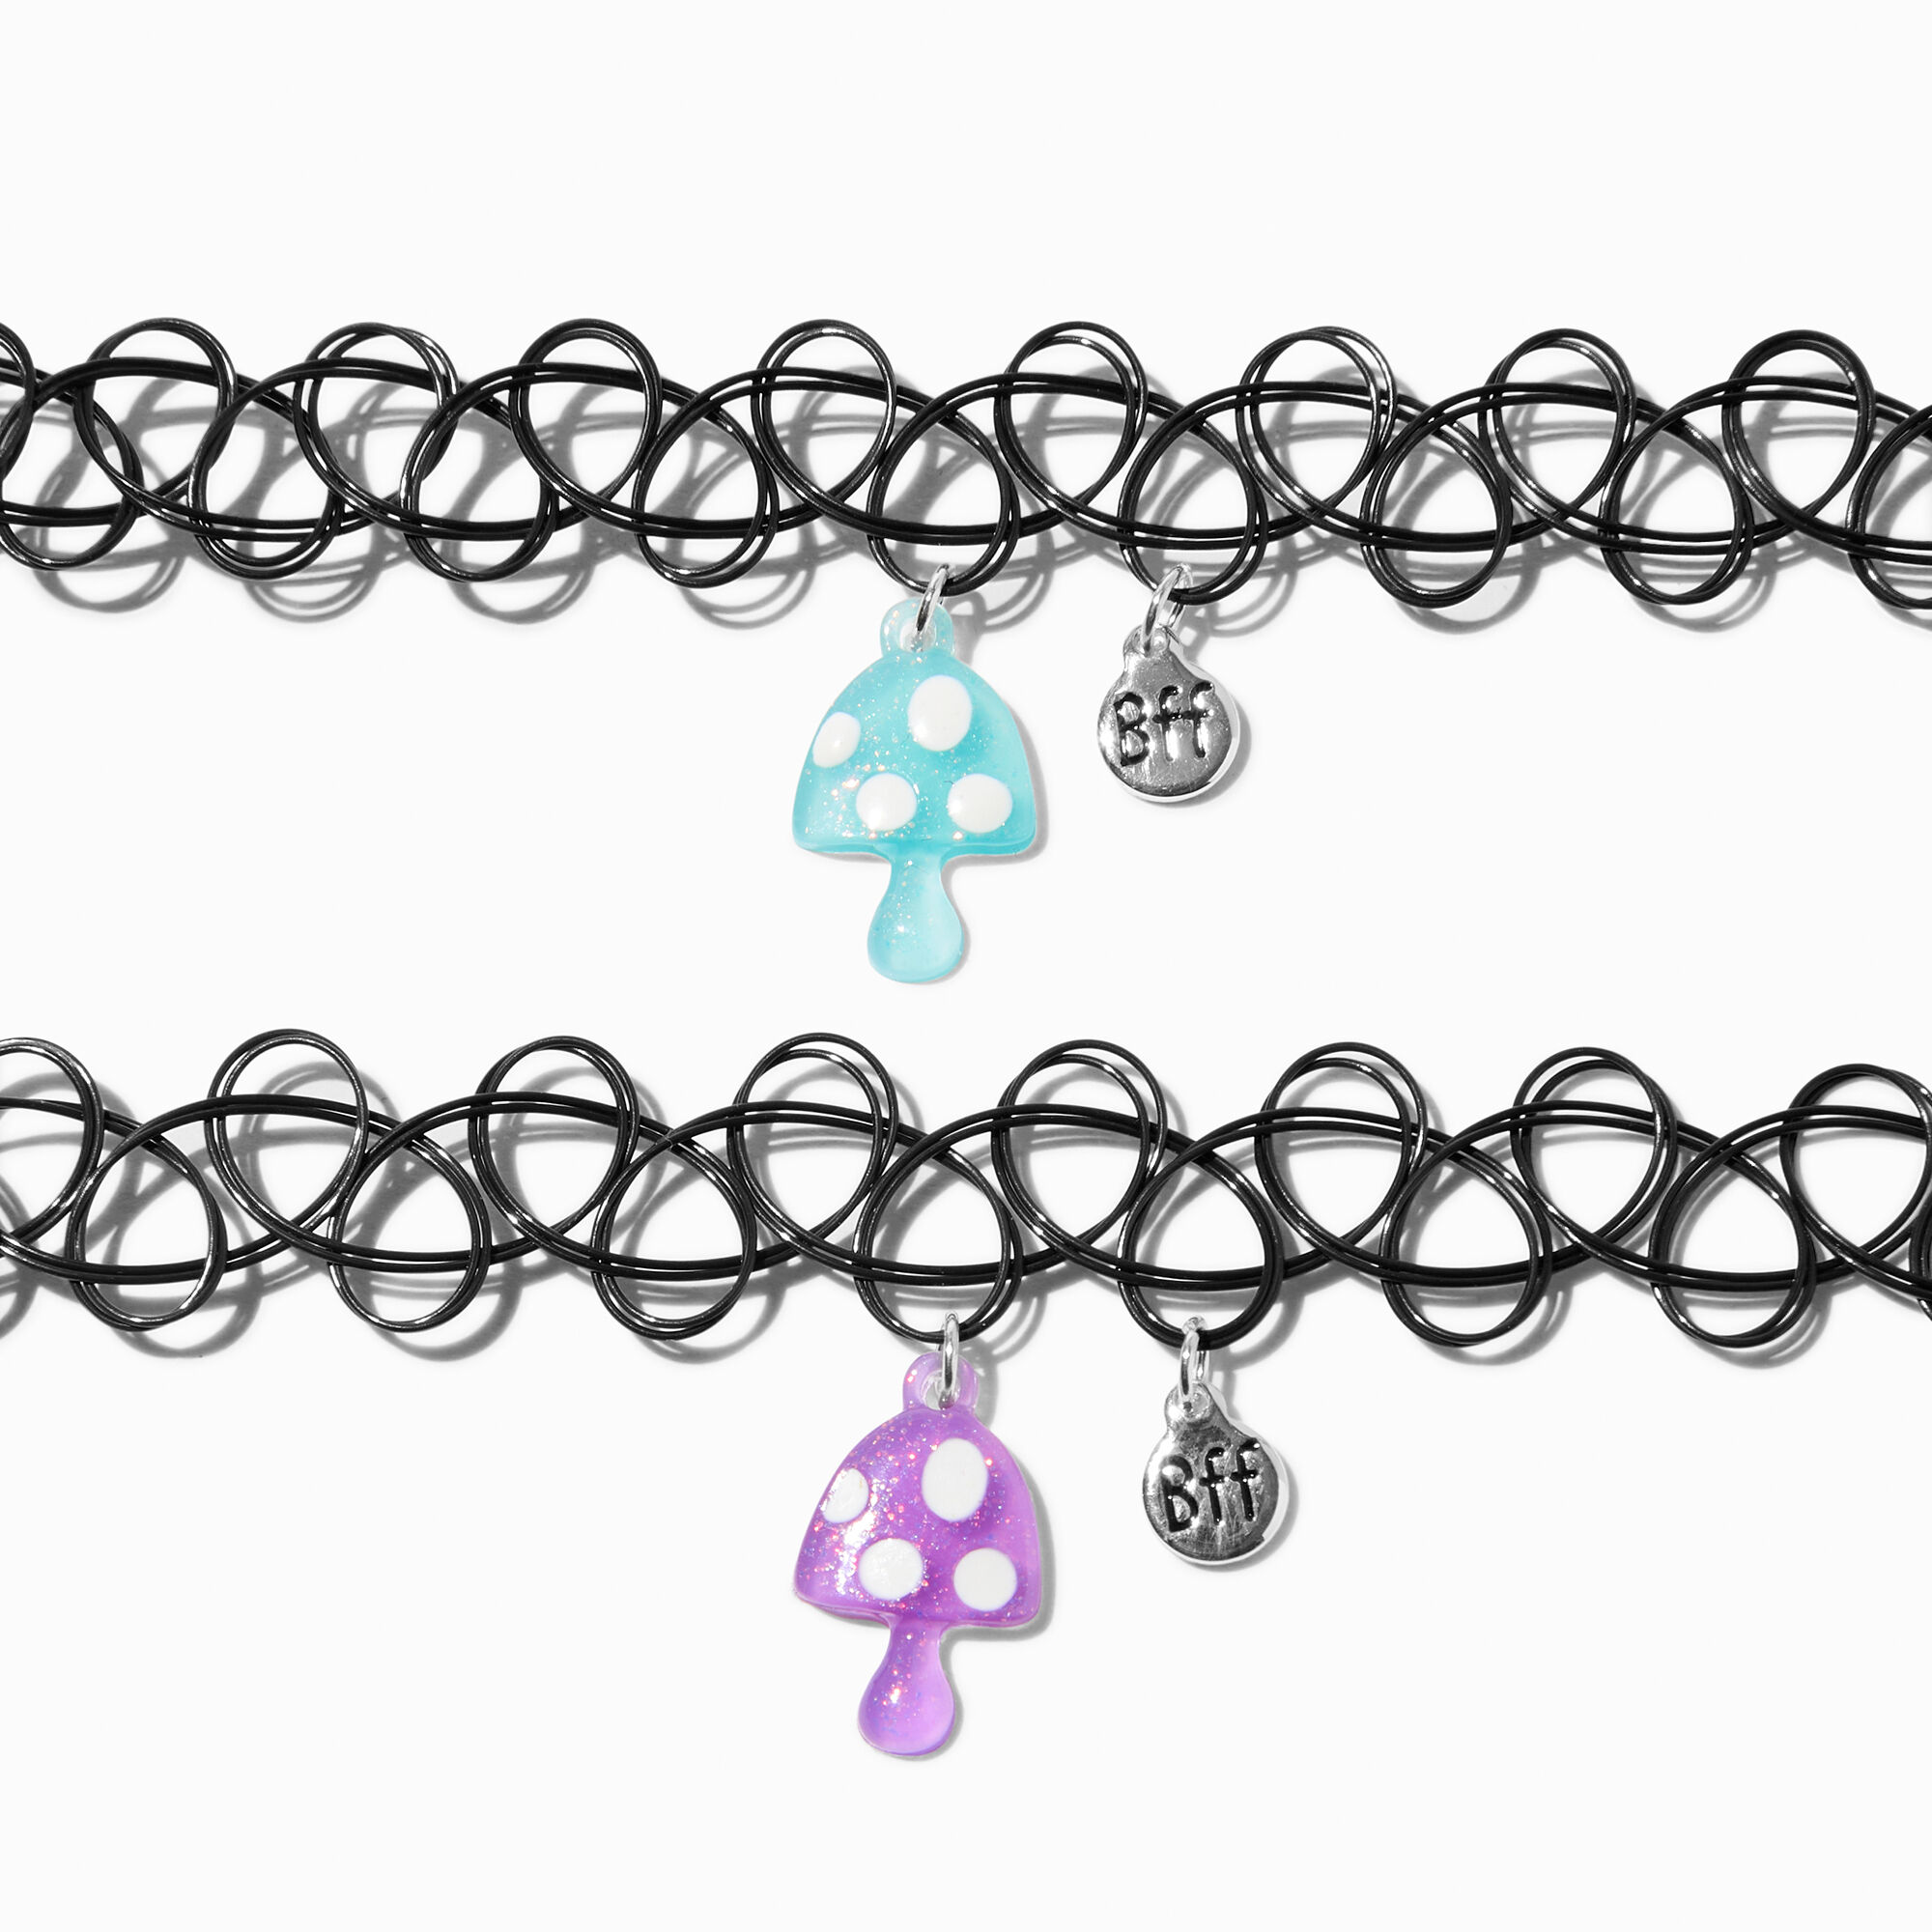 View Claires Best Friends Mushroom Uv ColorChanging Tattoo Choker Necklaces 2 Pack Black information